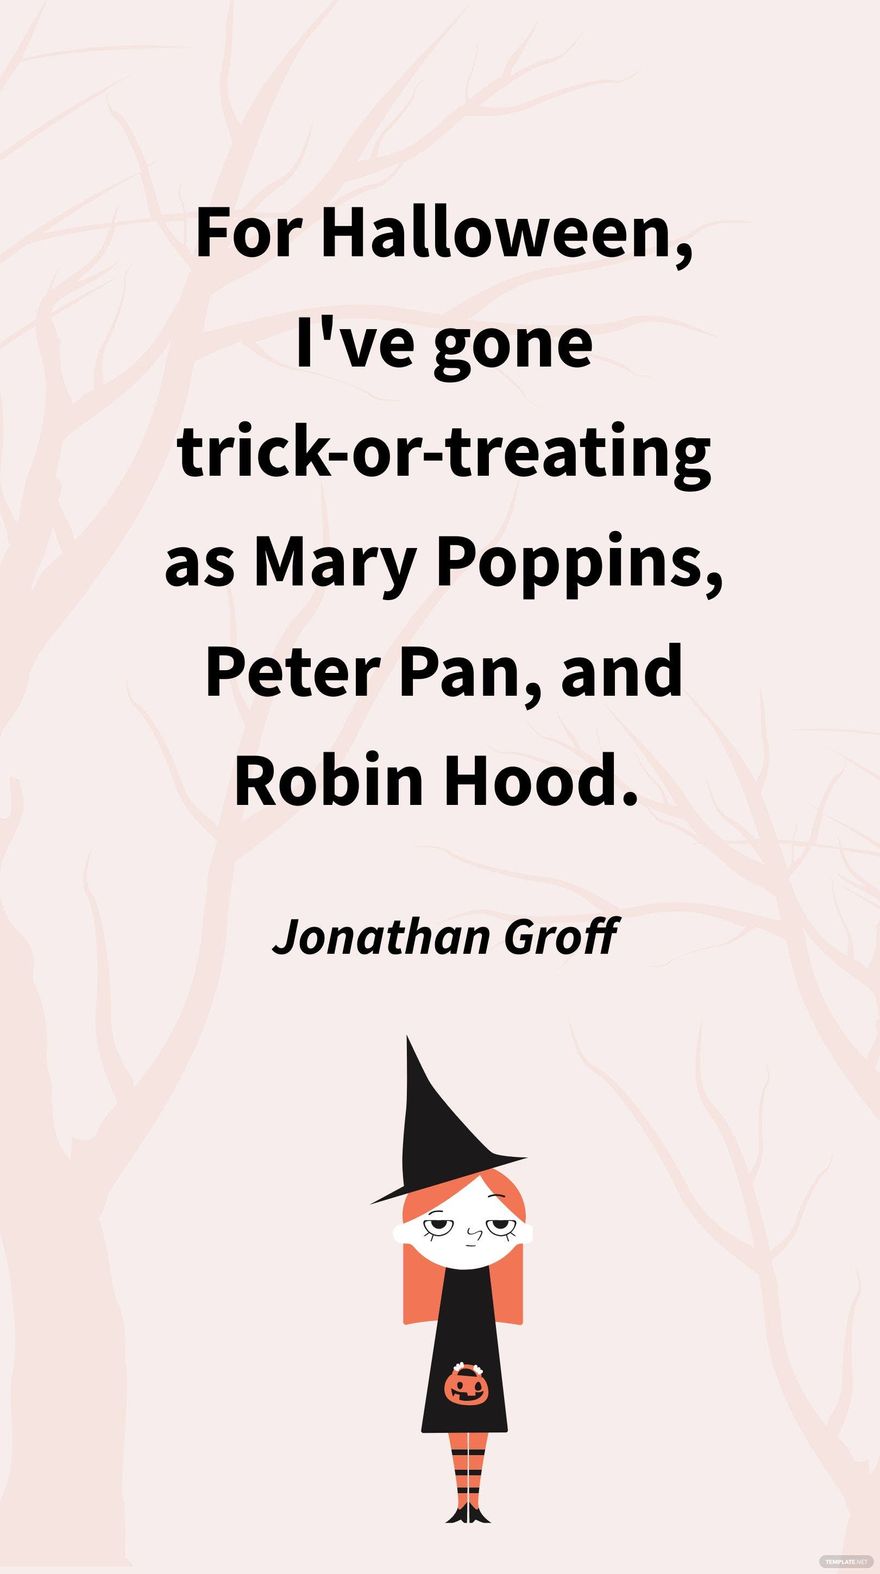 Jonathan Groff - For Halloween, I've gone trick-or-treating as Mary Poppins, Peter Pan, and Robin Hood. in JPG